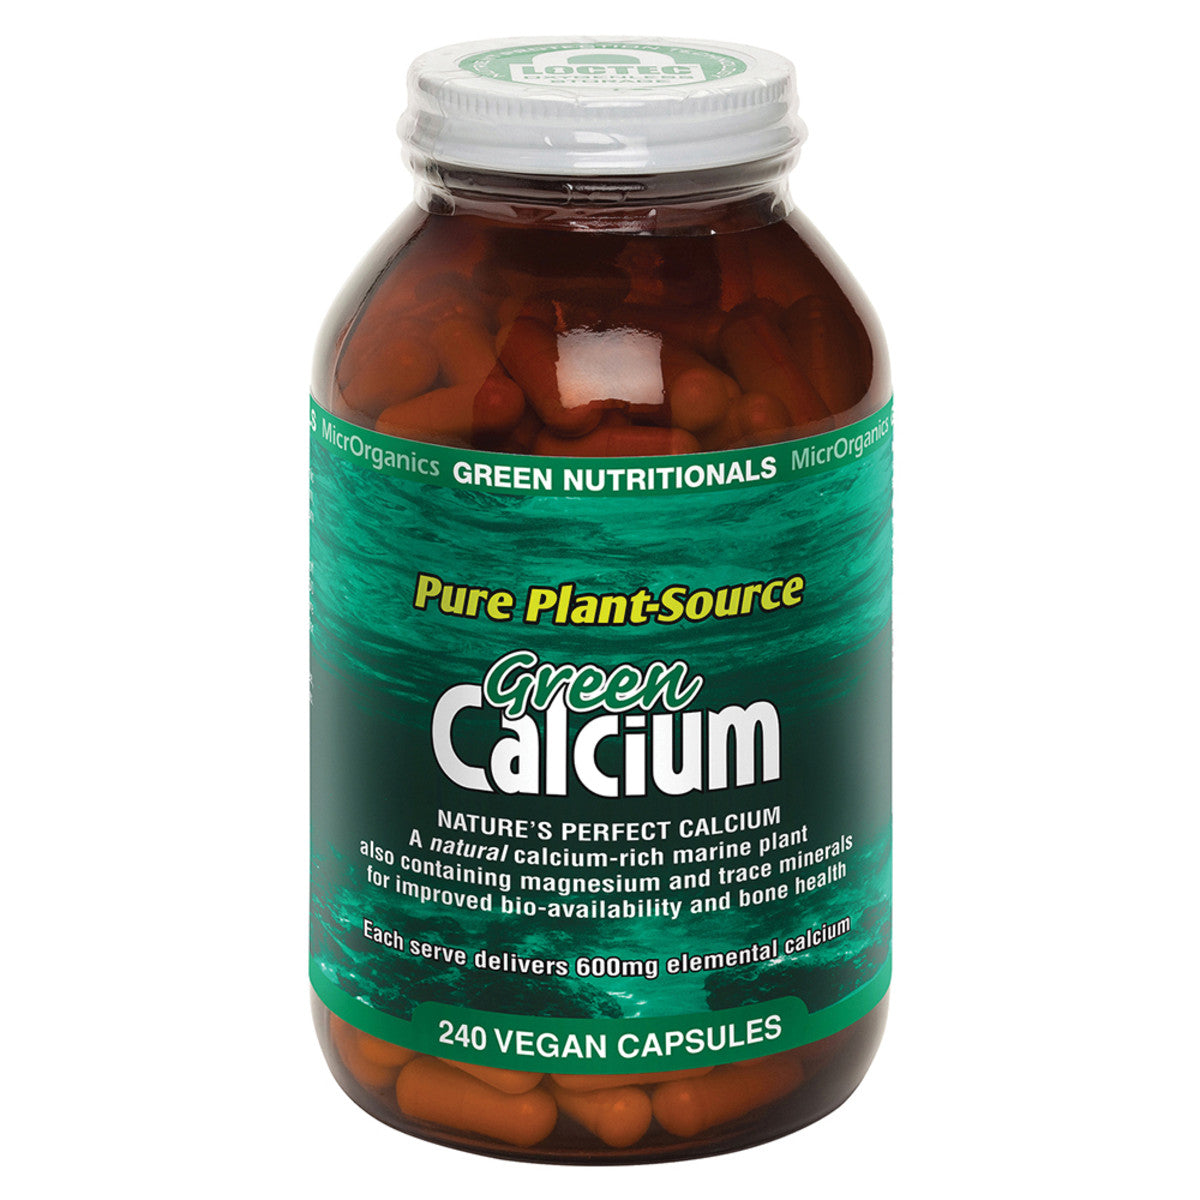 Green Nutritionals - Pure Plant-Source Green Calcium